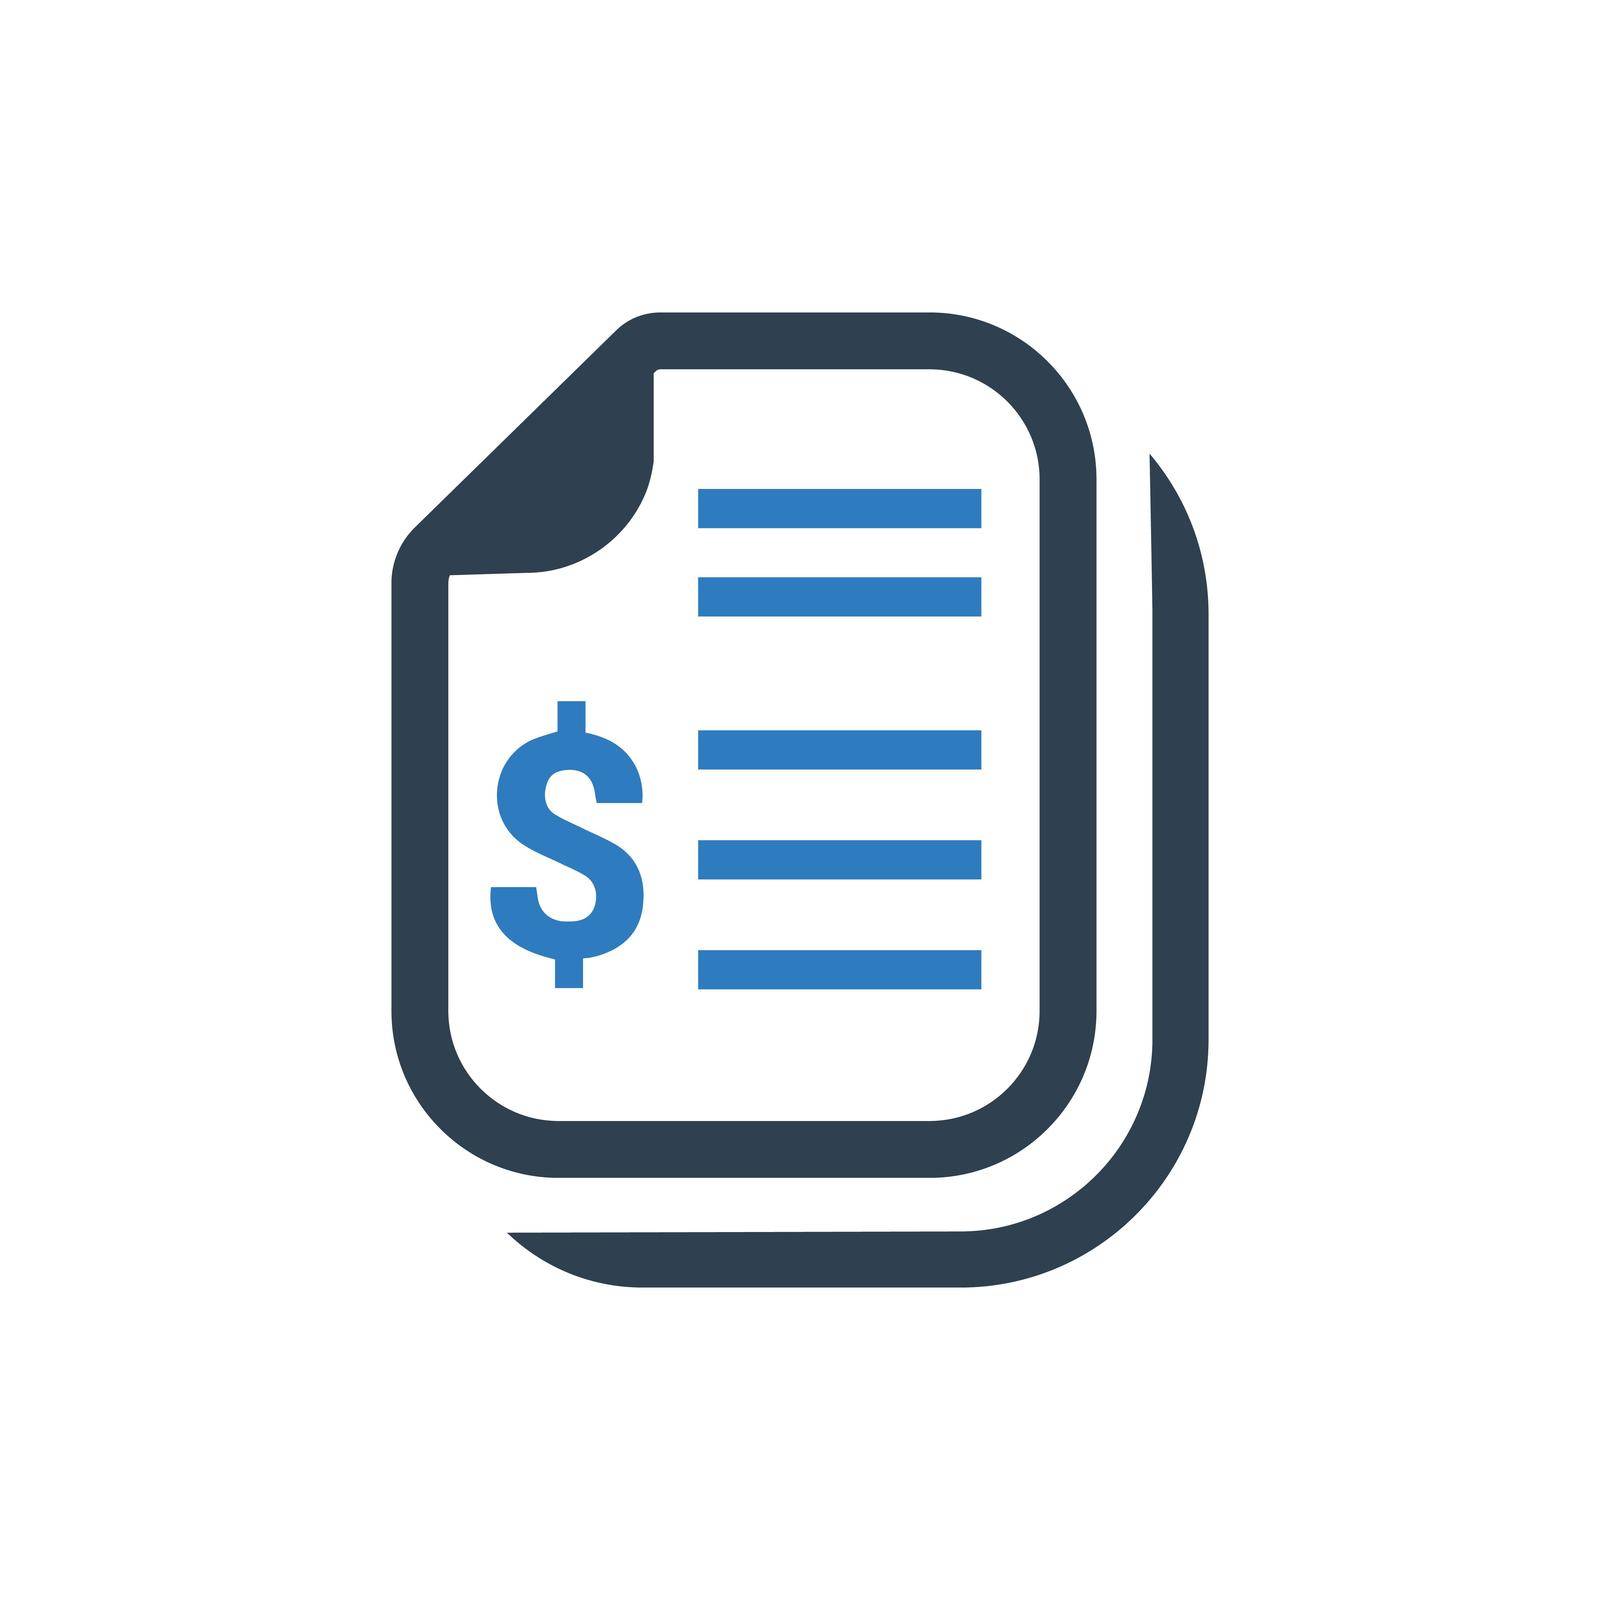 Financial Statement Icon by delwar018